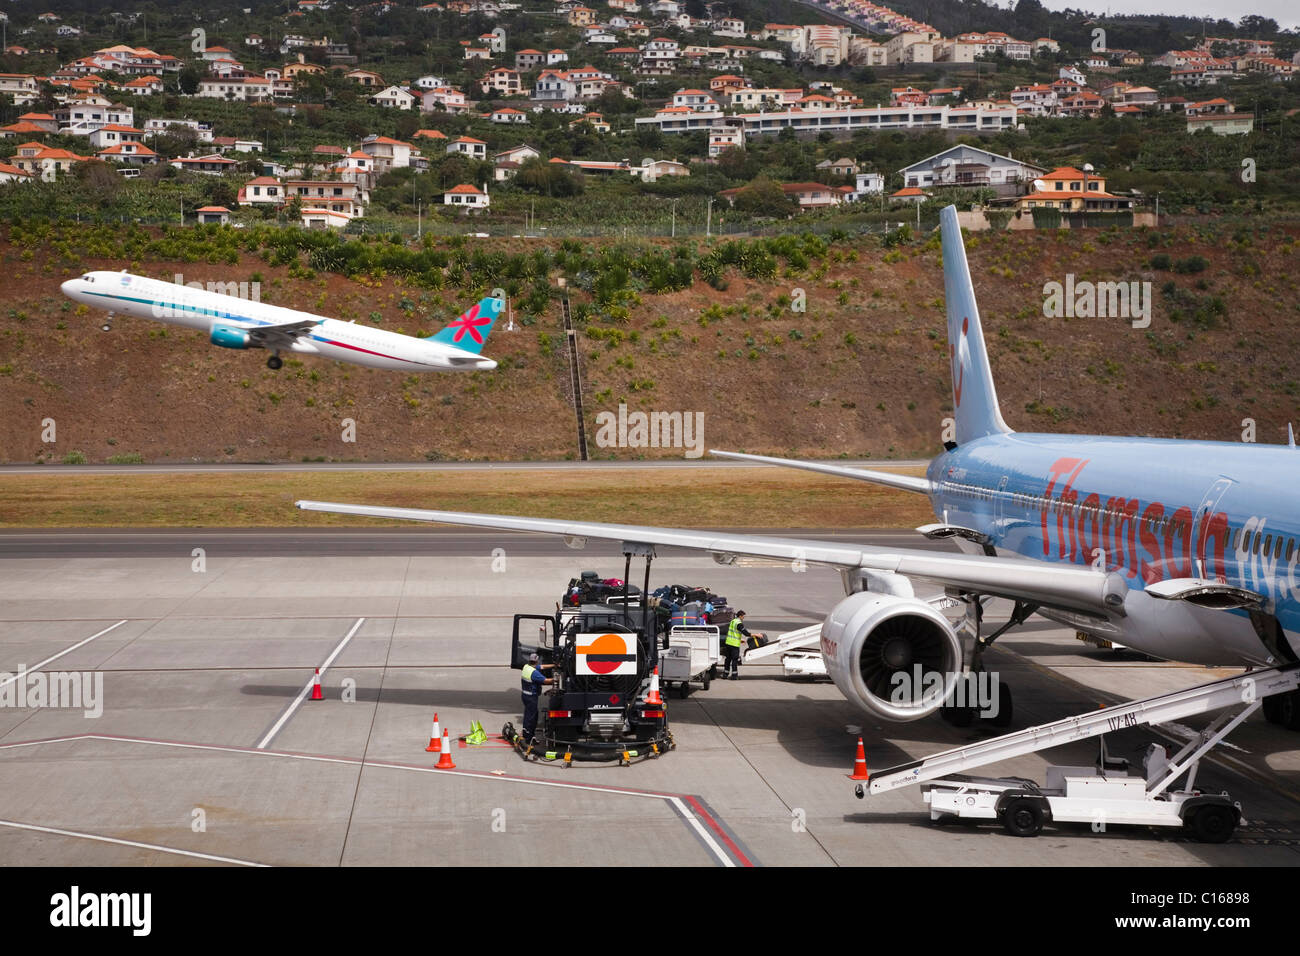 A First Choice aircraft takes off whilst a Thomson aircraft prepares for boarding at Funchal international airport, Madeira. Stock Photo